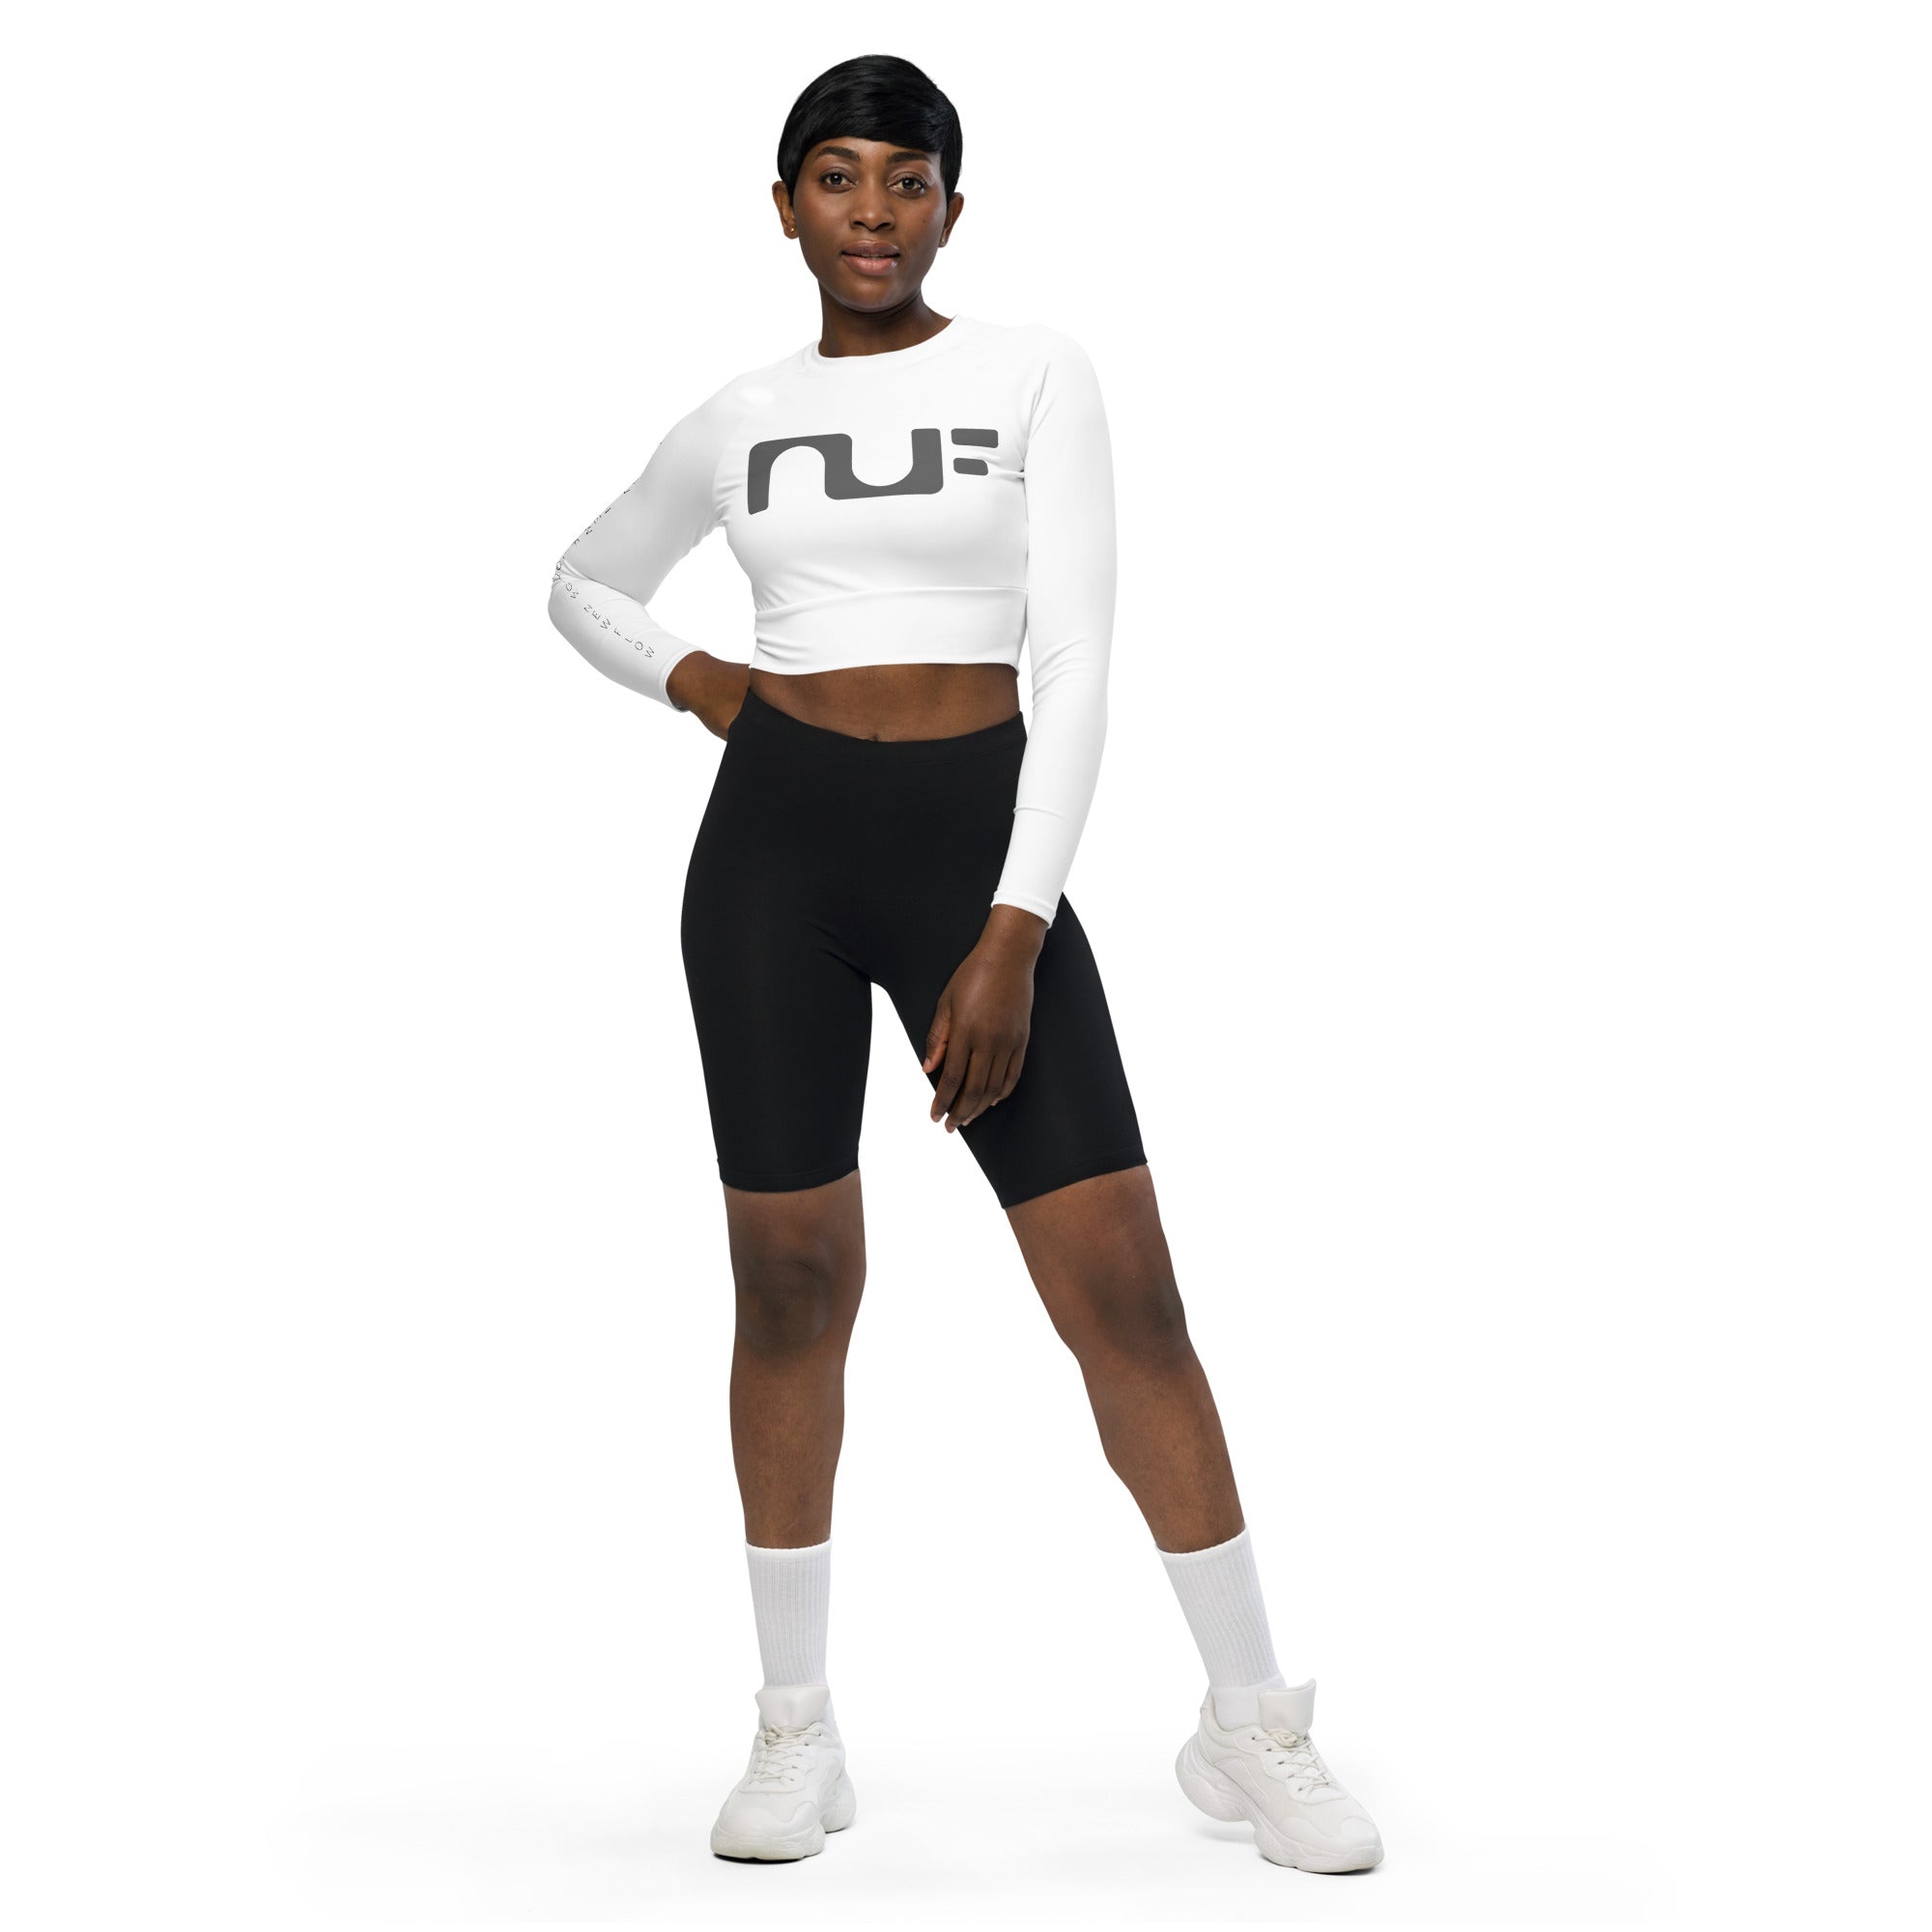 WOMEN'S RECYCLED LONG-SLEEVE CROP TOP – WHITE